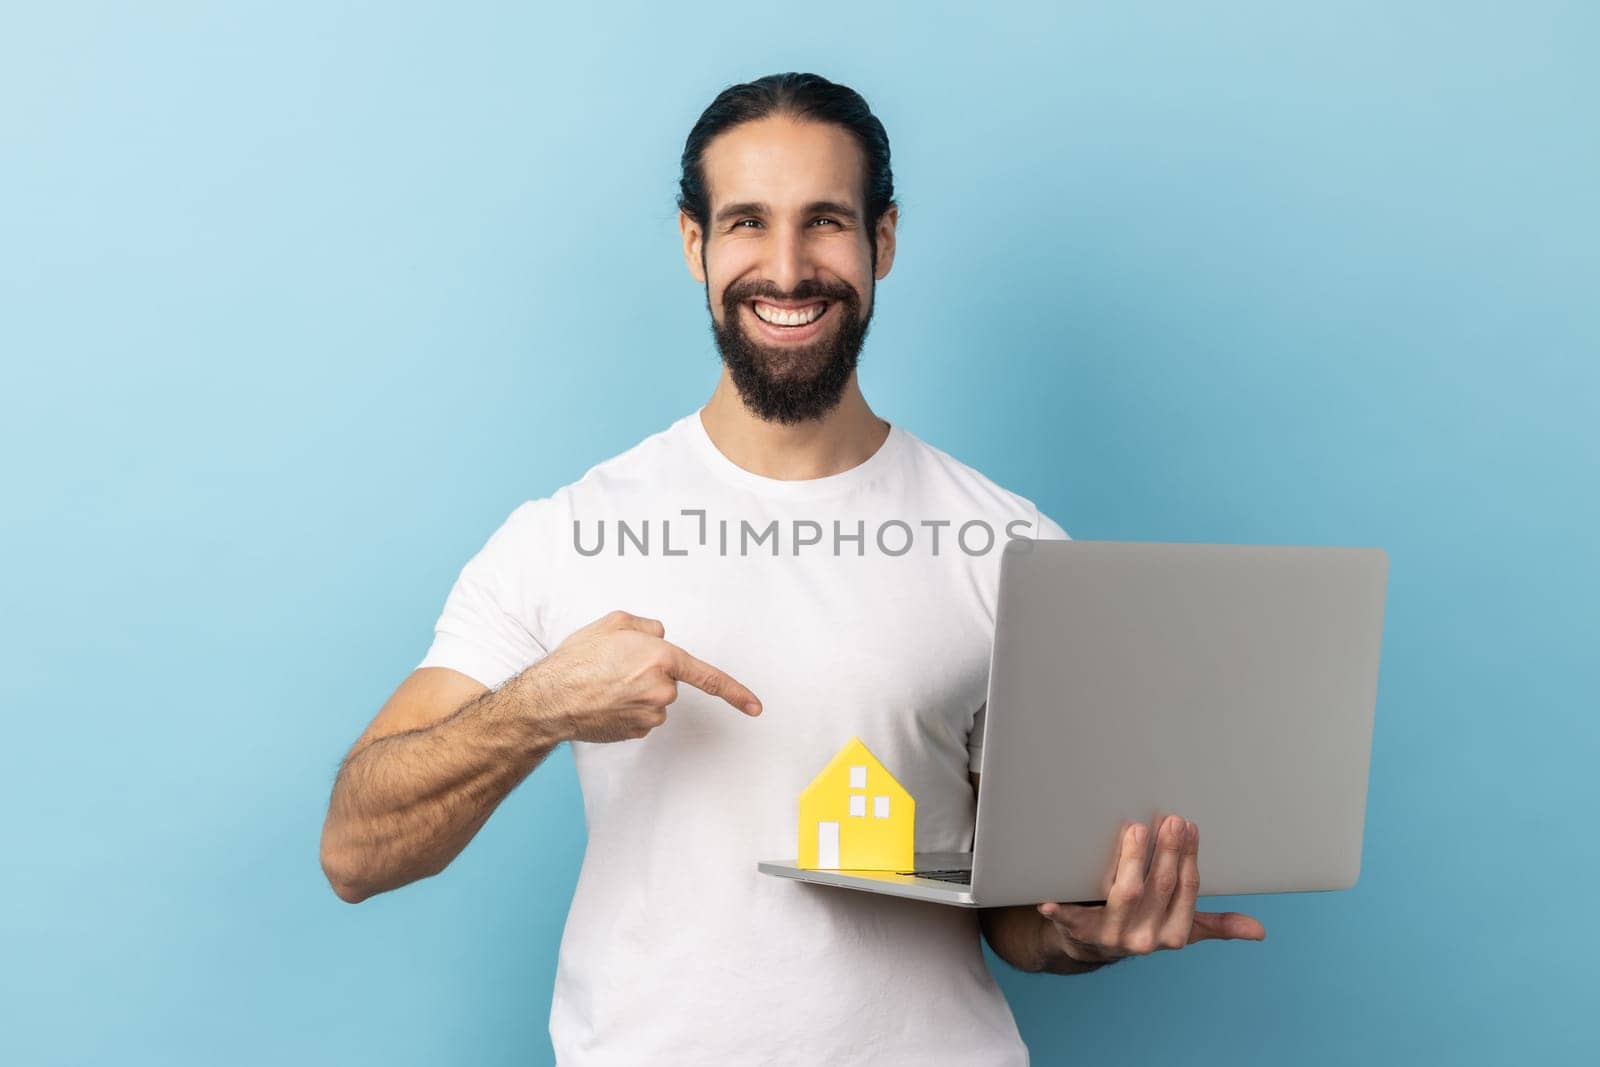 Portrait of happy man with beard wearing white T-shirt standing with paper and laptop, pointing at screen, helping with rent, working on project online. Indoor studio shot isolated on blue background.